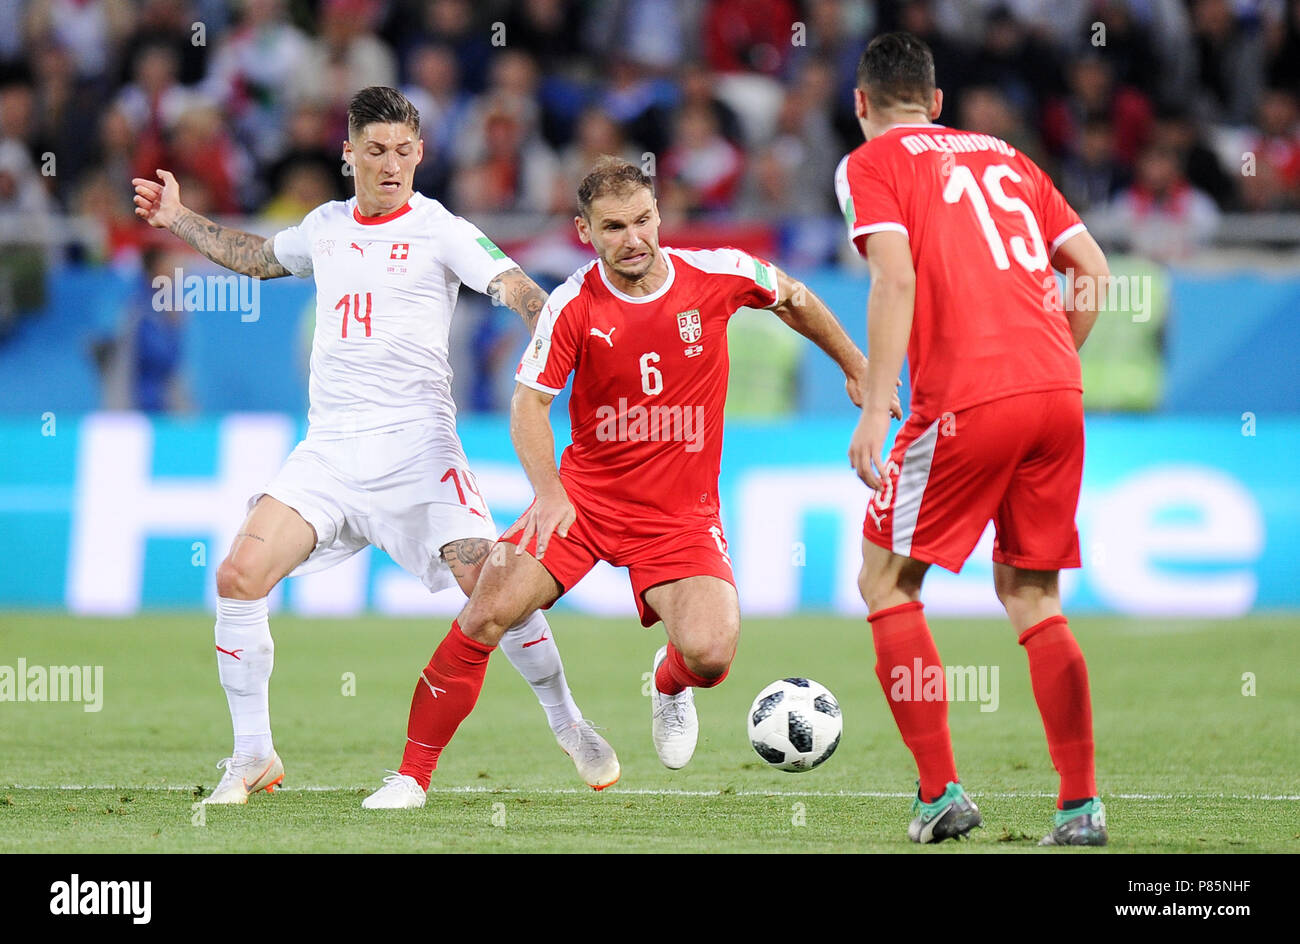 KALININGRAD, RUSSIA - JUNE 22: Steven Zuber of Switzerland competes with Branislav Ivanovic of Serbia during the 2018 FIFA World Cup Russia group E match between Serbia and Switzerland at Kaliningrad Stadium on June 22, 2018 in Kaliningrad, Russia. (Photo by Norbert Barczyk/PressFocus/MB Media) Stock Photo